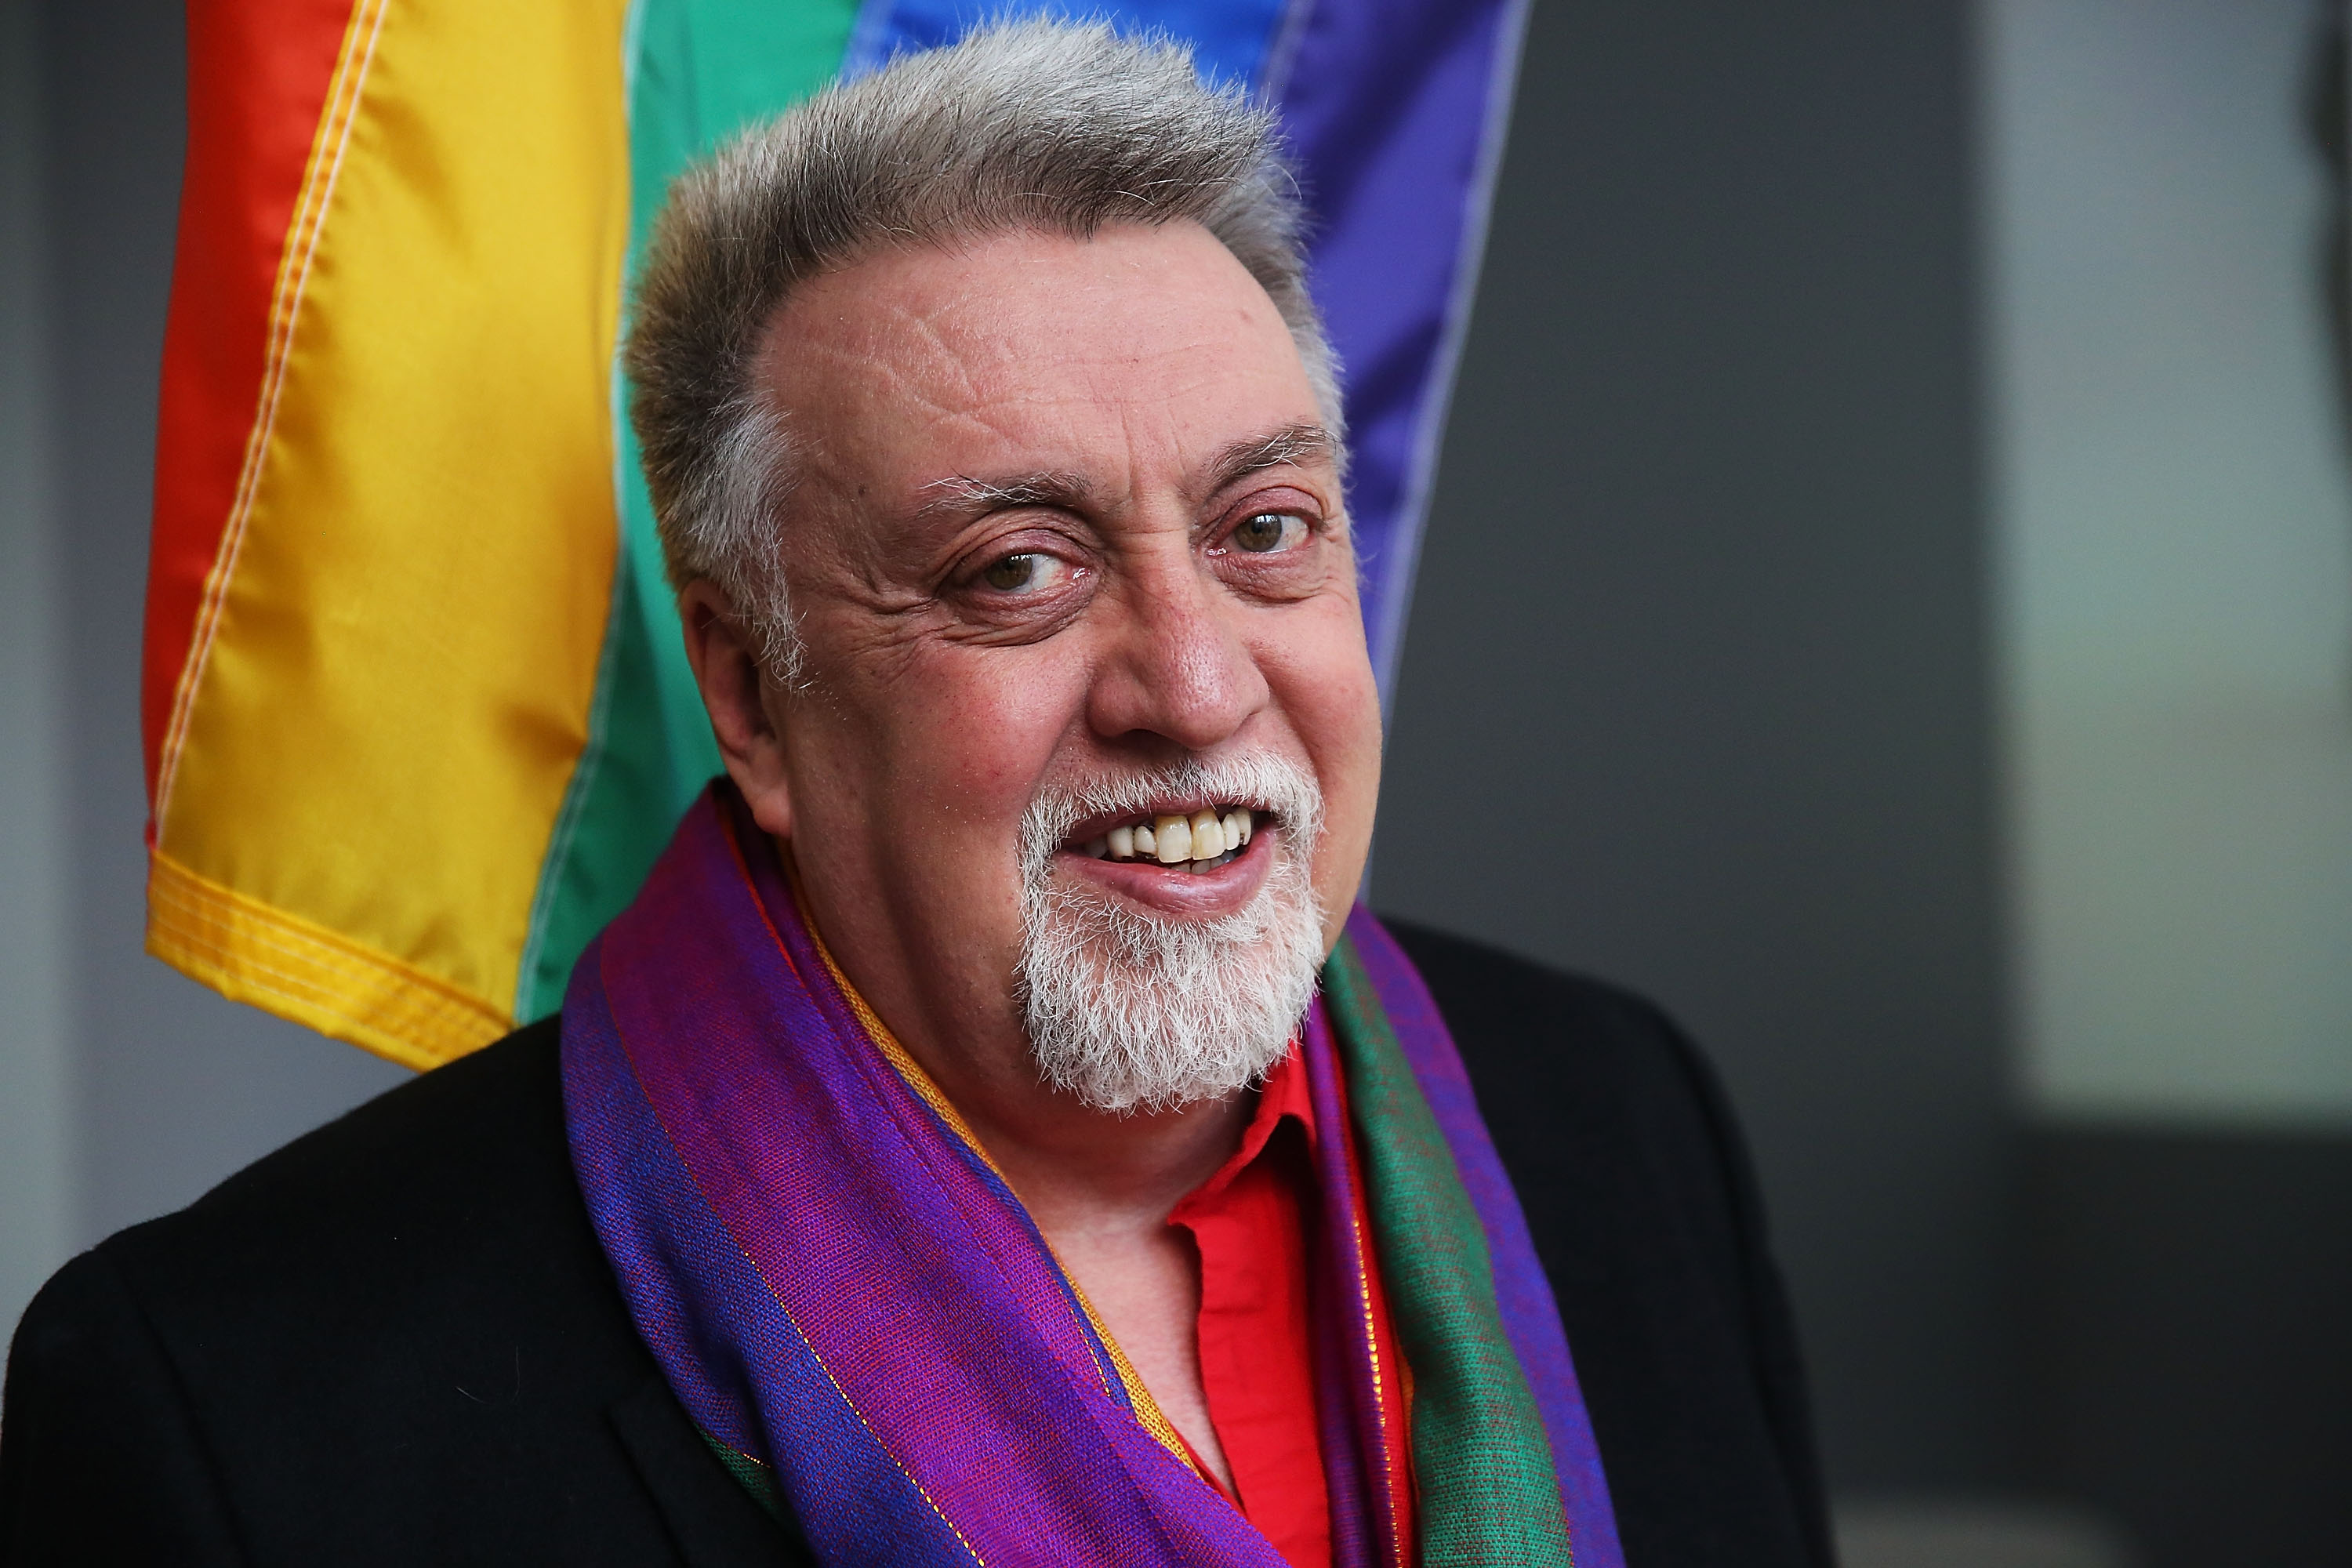 NEW YORK, NY - JANUARY 07:  Rainbow Flag Creator Gilbert Baker poses at the Museum of Modern Art (MoMA) on January 7, 2016 in New York City. MoMa announced in June 2015 its acquisition of the iconic Rainbow Flag into the design collection. Baker, an openly gay artist and civil rights activist, designed the Rainbow Flag in 1978. The flag has since become a prominent symbol to the gay community around the world. (Spencer Platt —Getty Images)